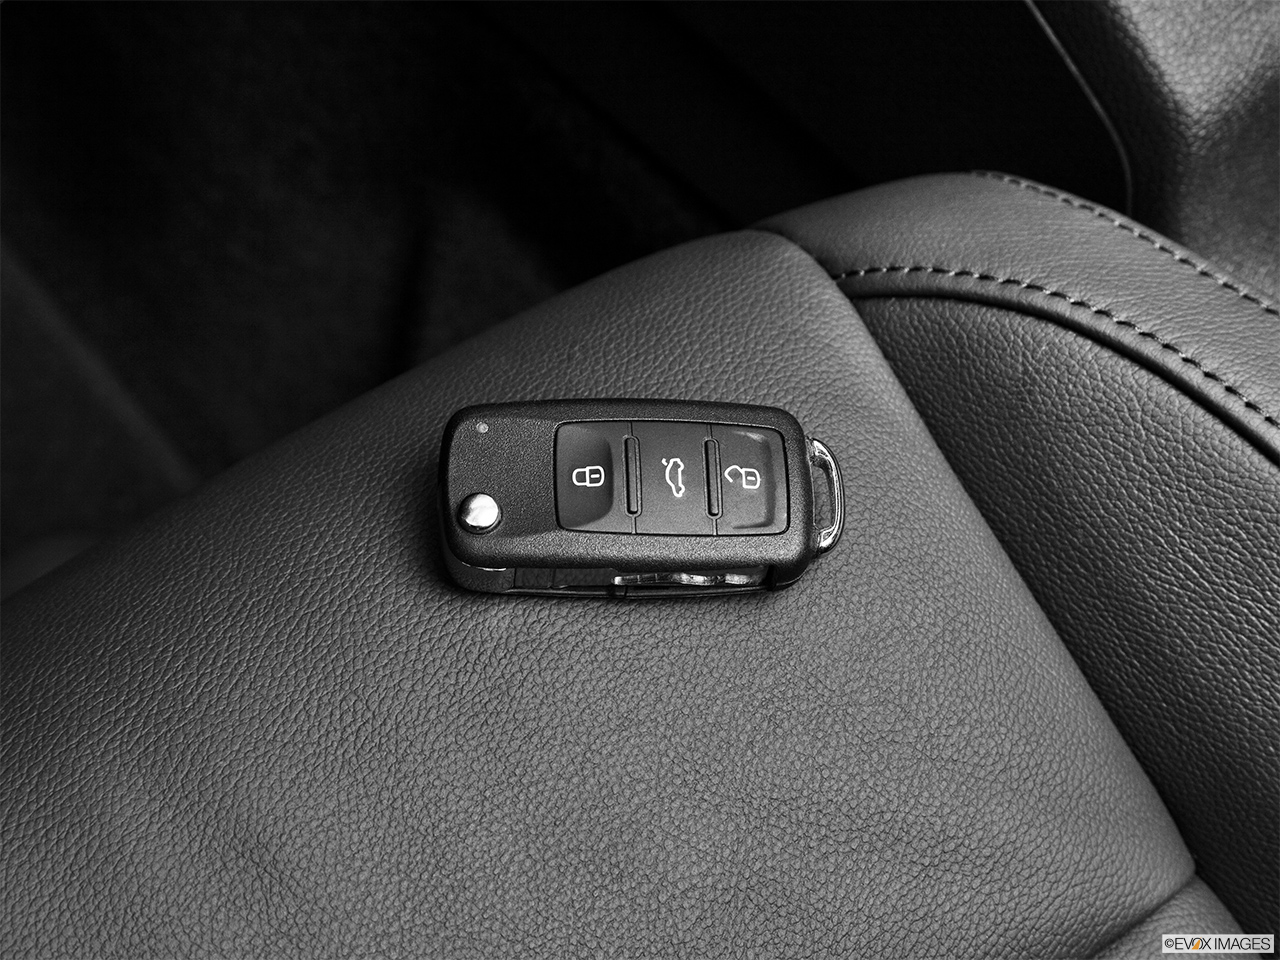 2012 Volkswagen Eos Lux Key fob on driver's seat. 